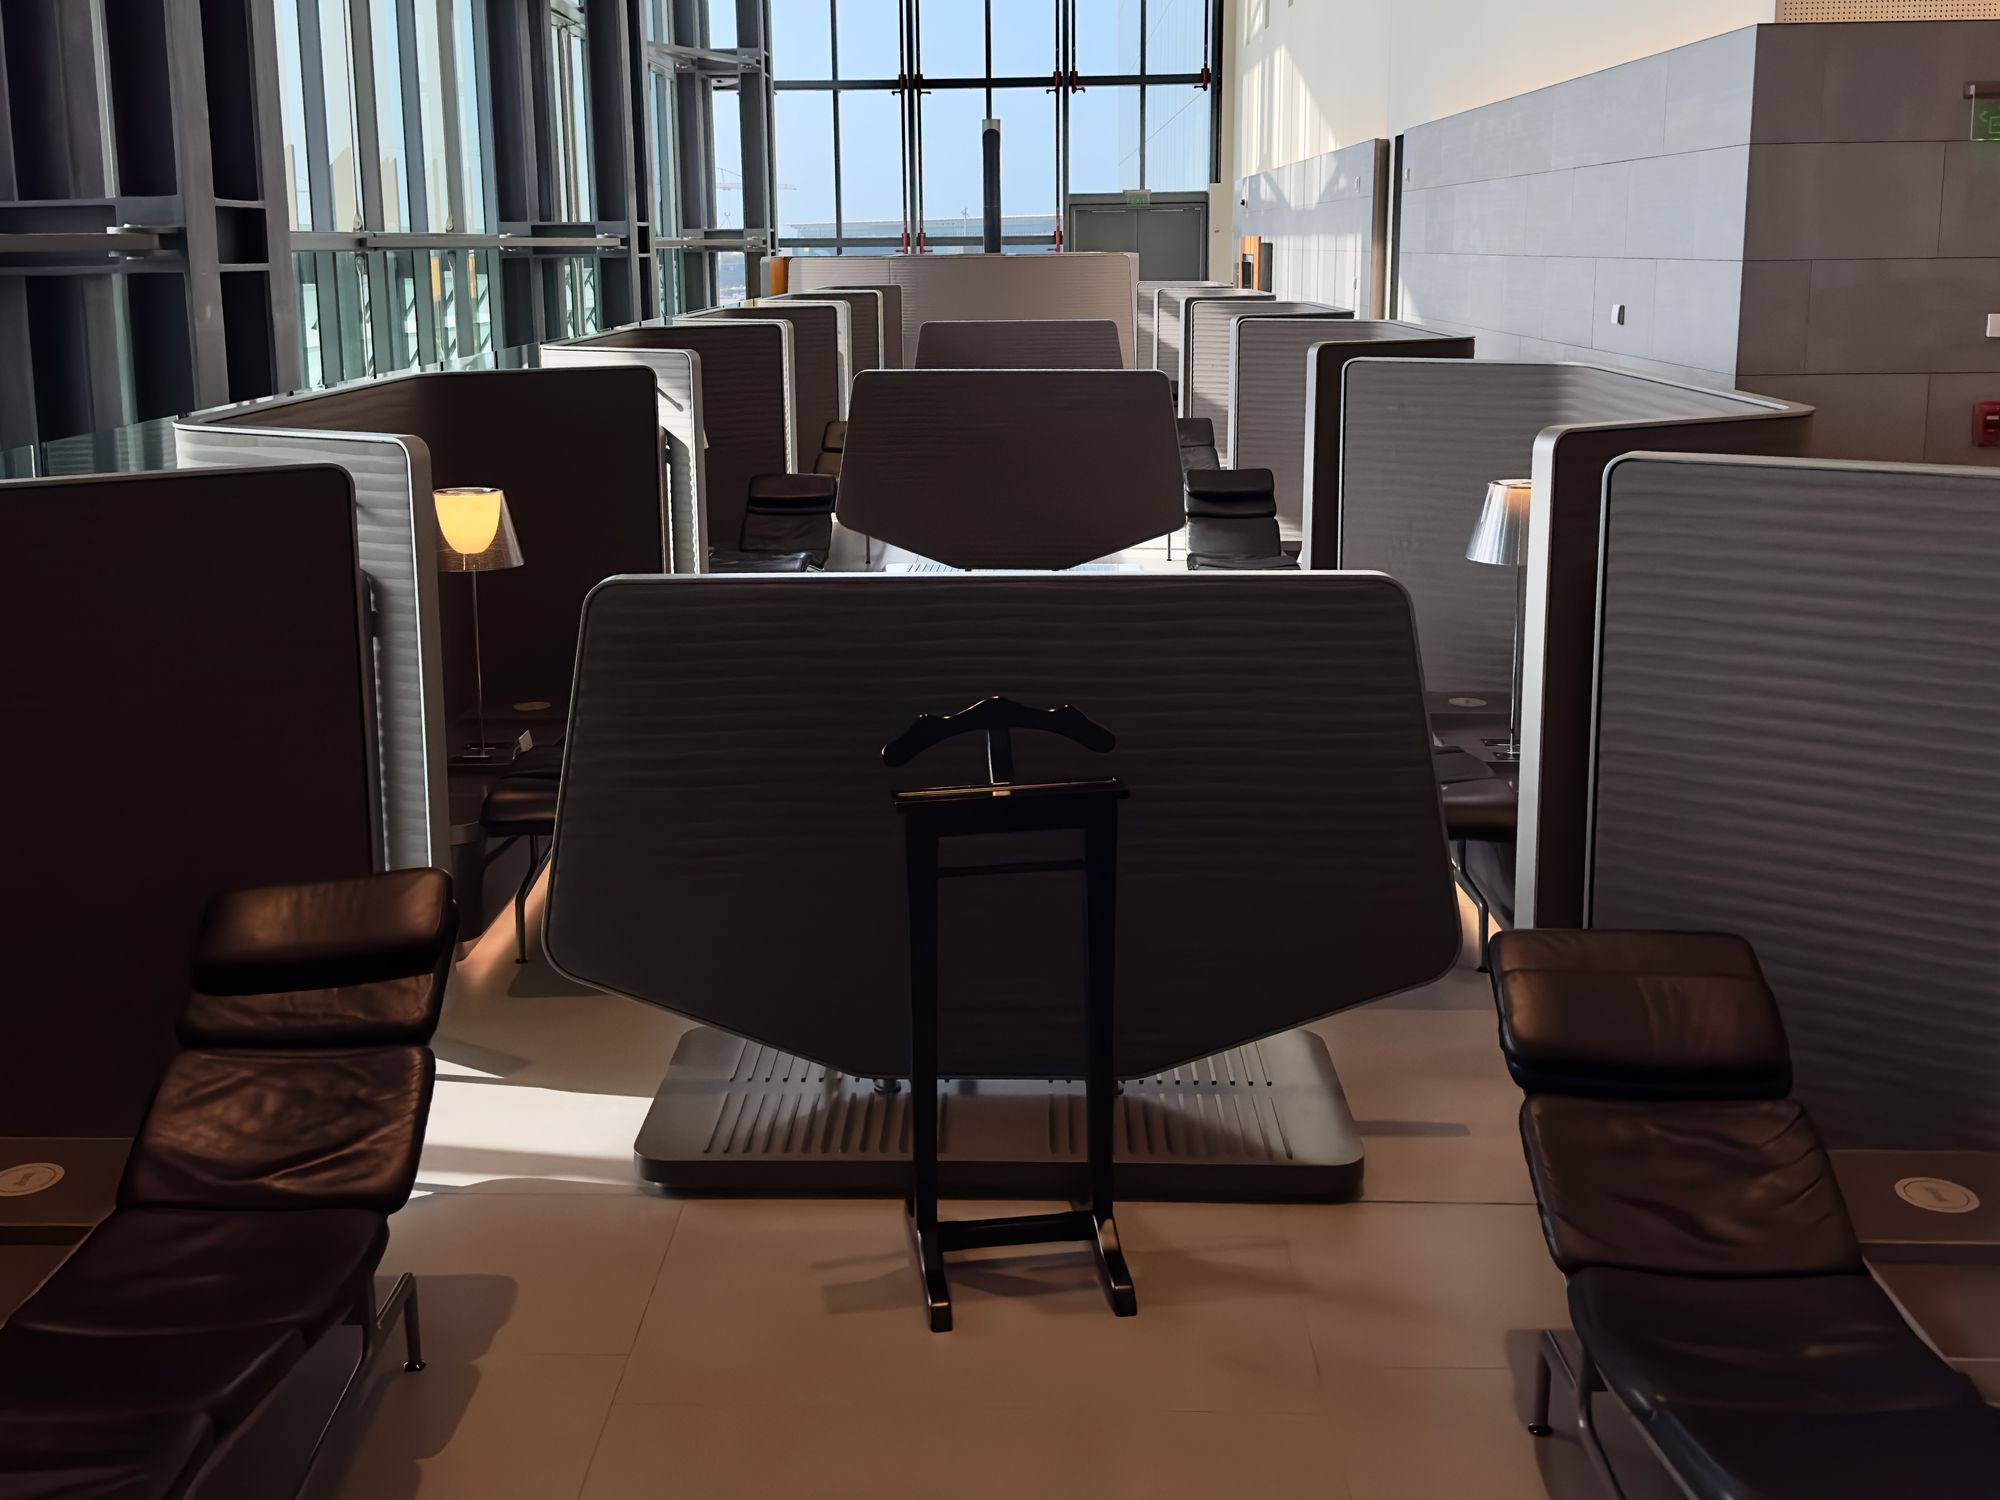 Napping recliners at the Qatar Airways Al Mourjan Business South Lounge in Hamad International Airport